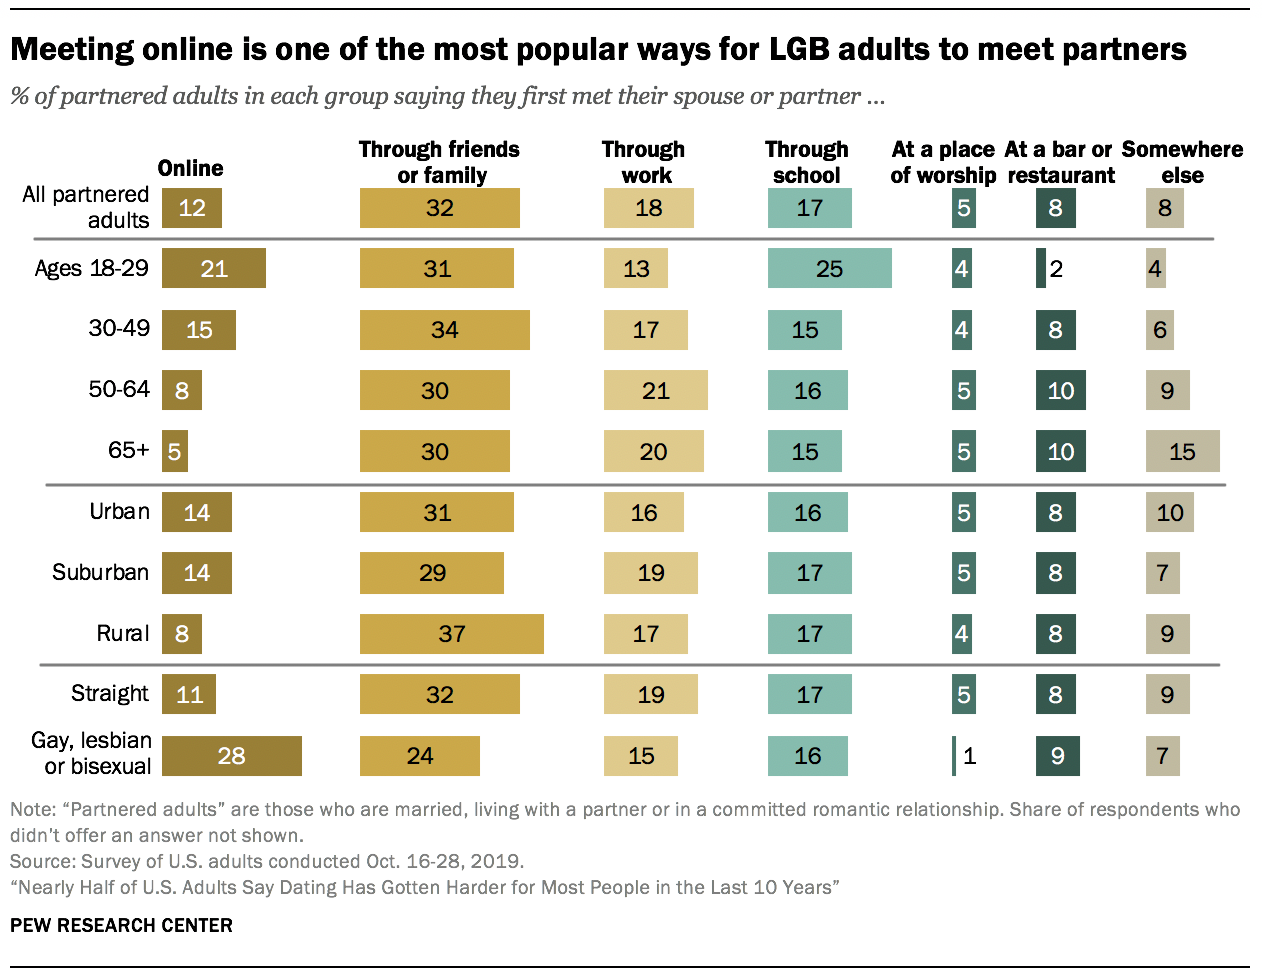 Meeting online is one of the most popular ways for LGB adults to meet partners